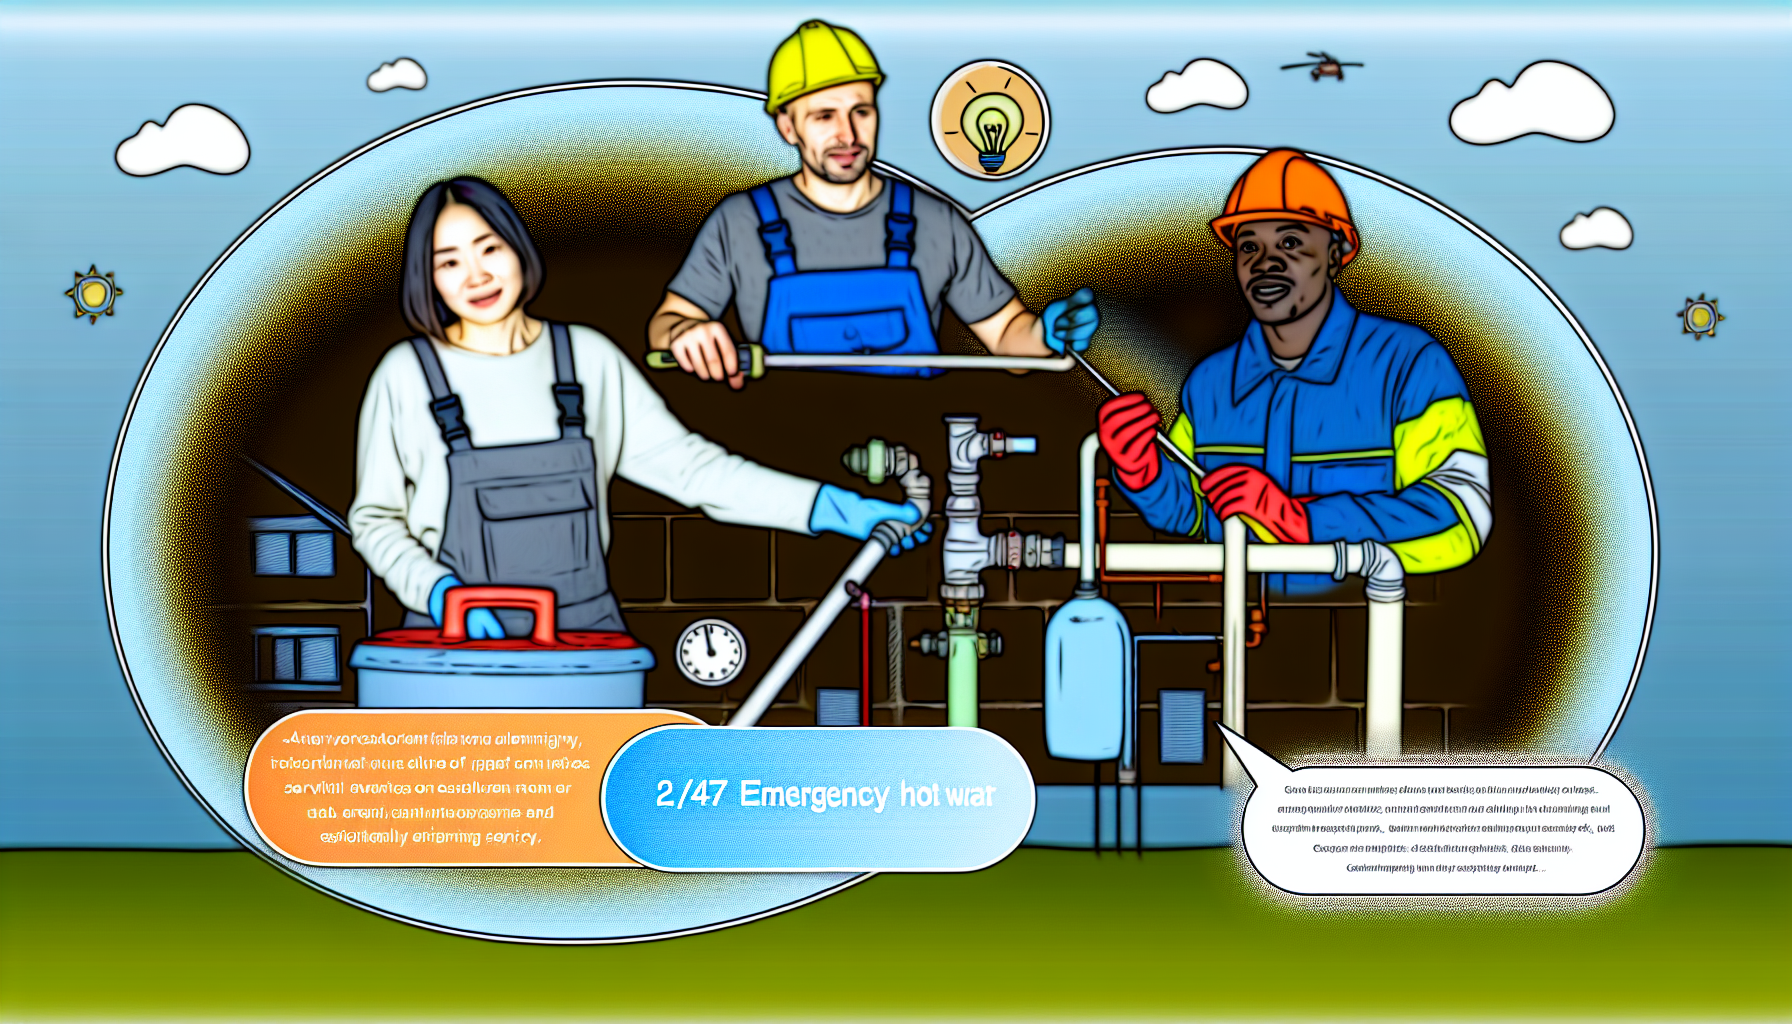 24/7 emergency hot water services with same-day system fitting and installation at InstalledToday